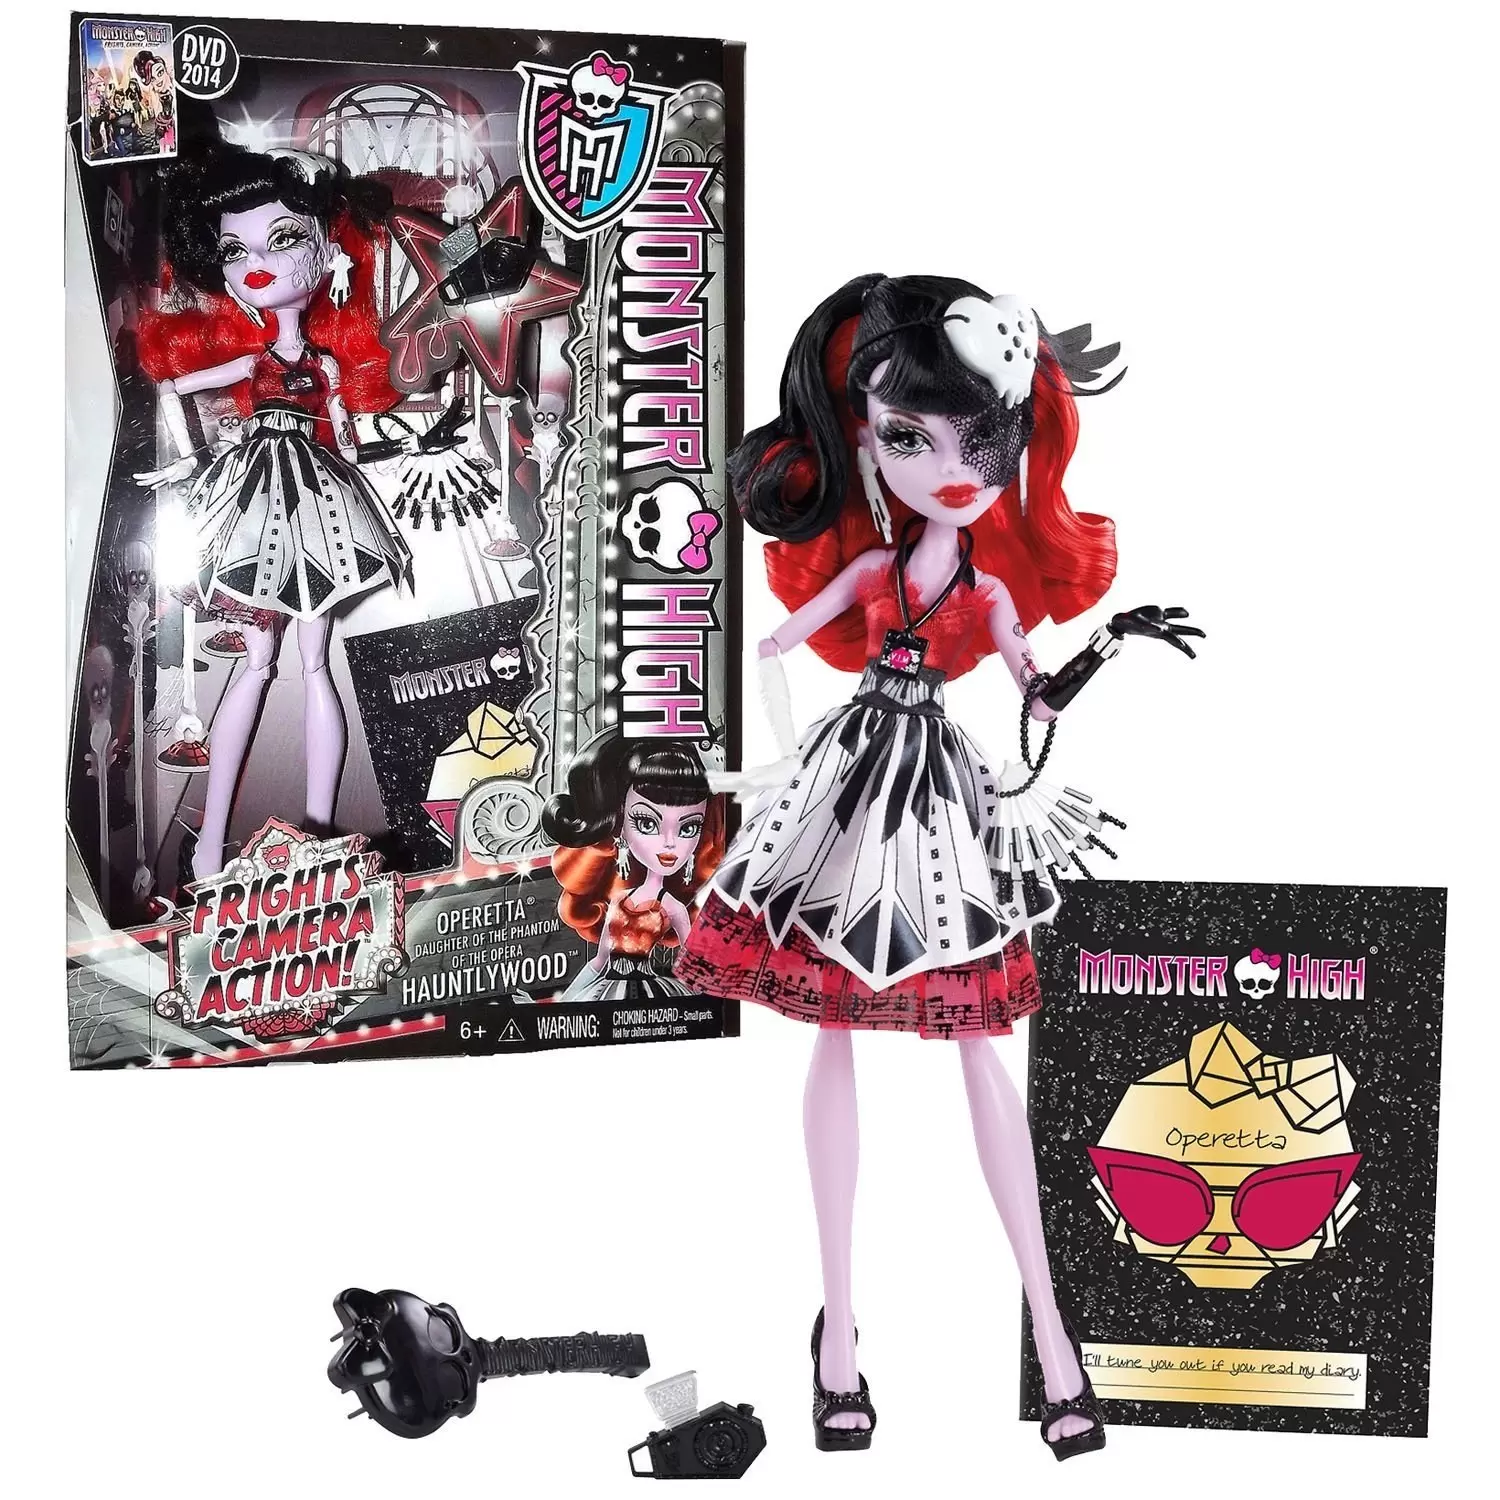 Monster High Frights, Camera, Action! Viperine Gorgon Doll – One-Touch Top  Tred Toys